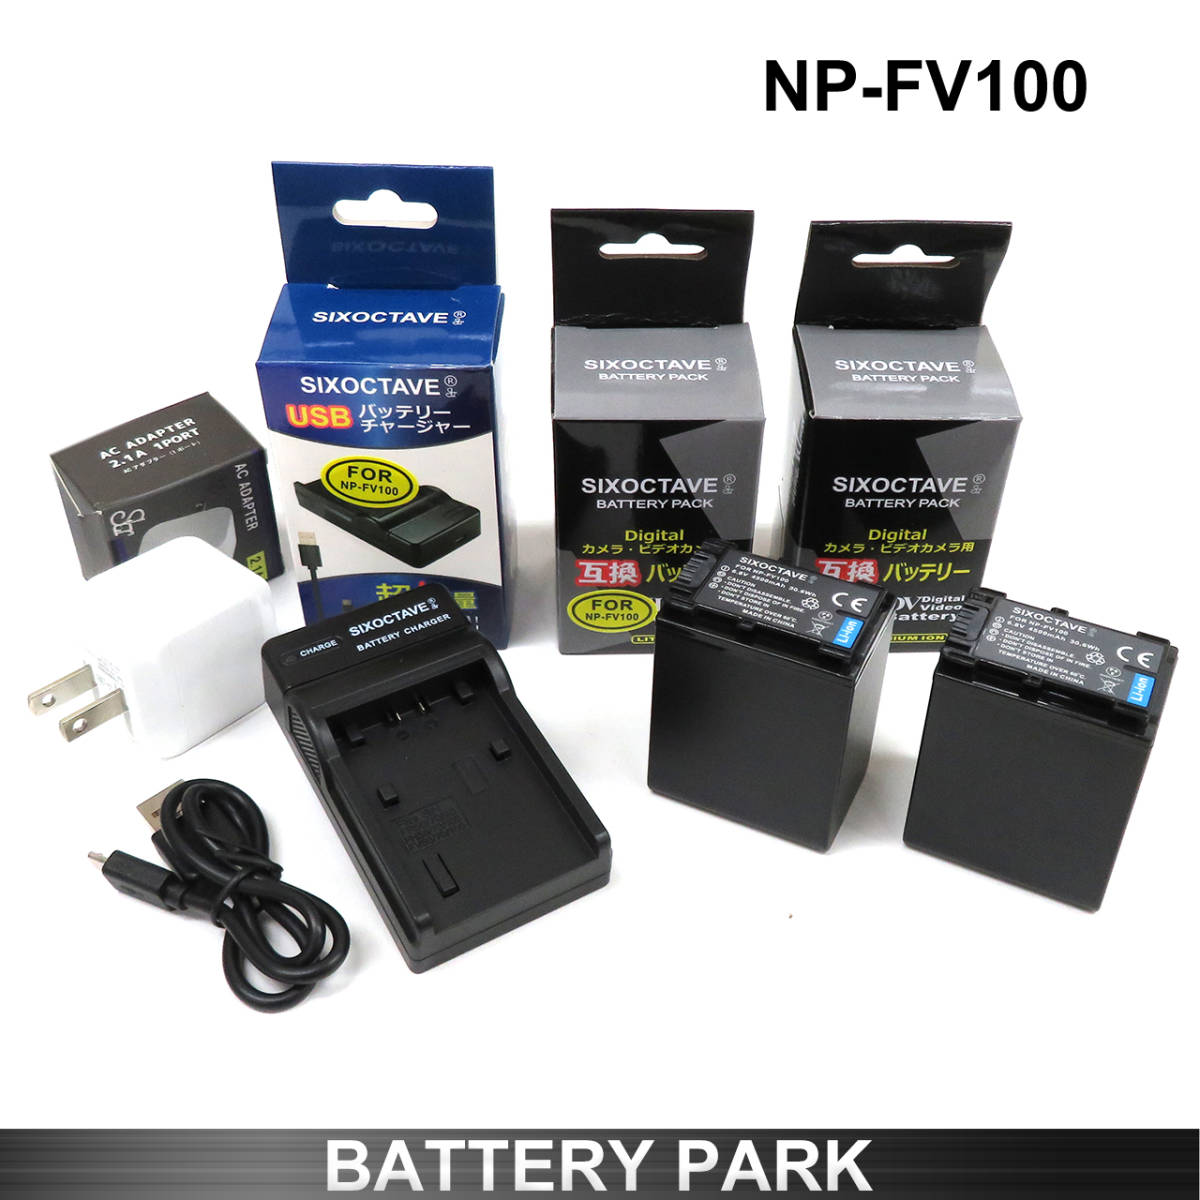 SONY NP-FV100 interchangeable battery 2 piece . interchangeable charger 2.1A high speed AC adaptor attaching HDR-CX535 FDR-AX45 FDR-AX700 FDR-AX55 FDR-AX45 FDR-AX30